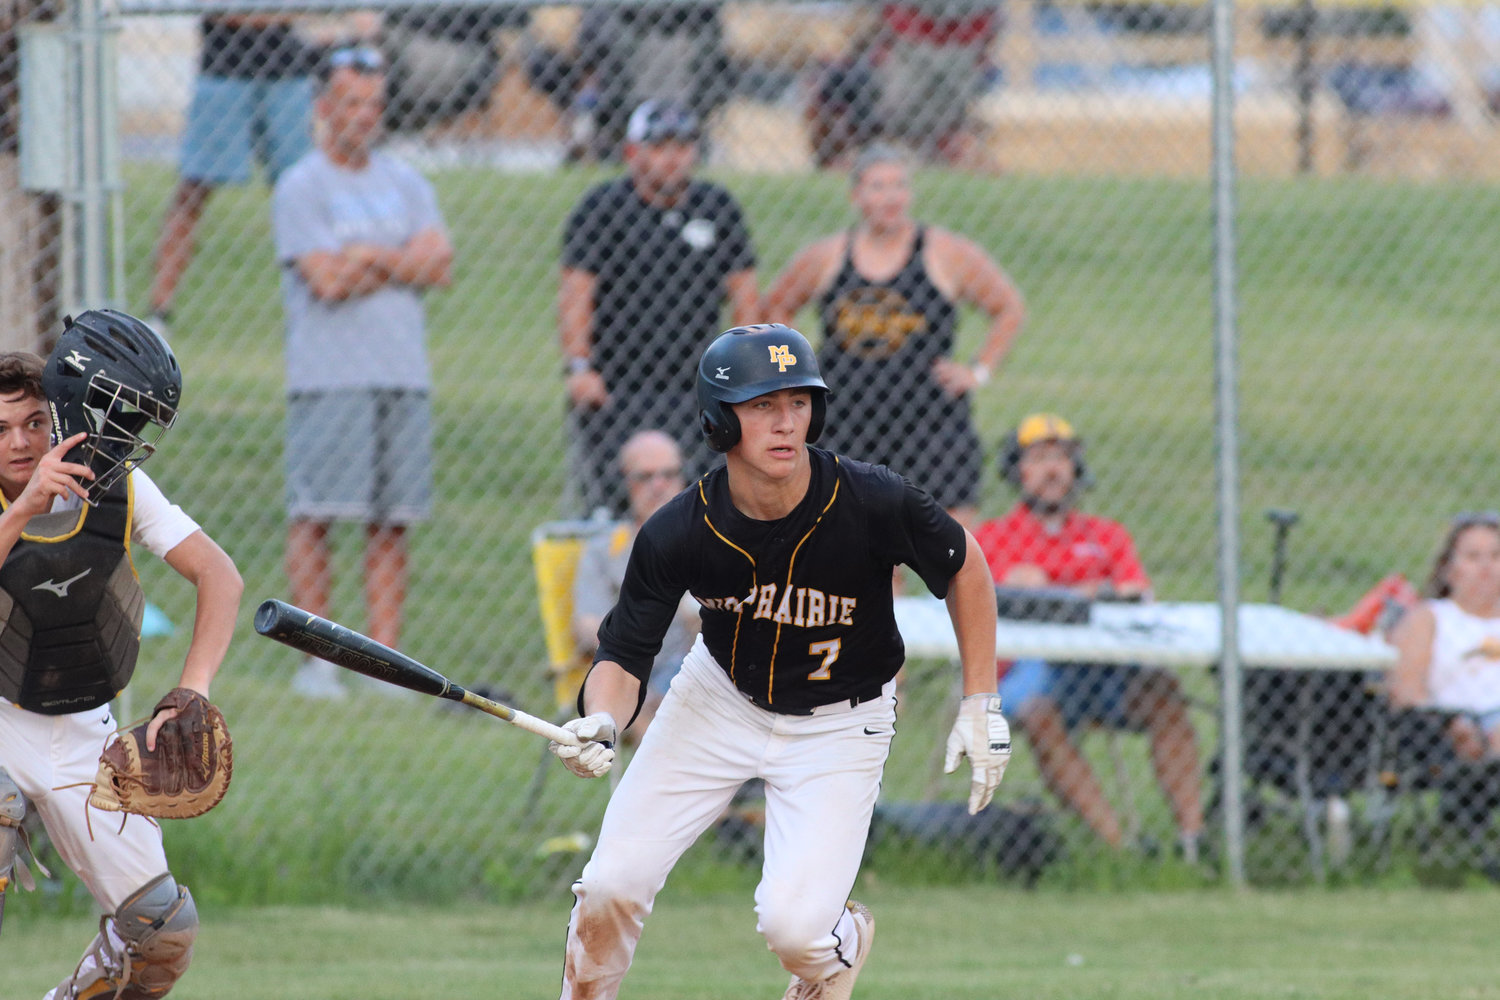 Karson Grout puts a ball in play during a Mid-Prairie win over Tipton on June 28, 2021.